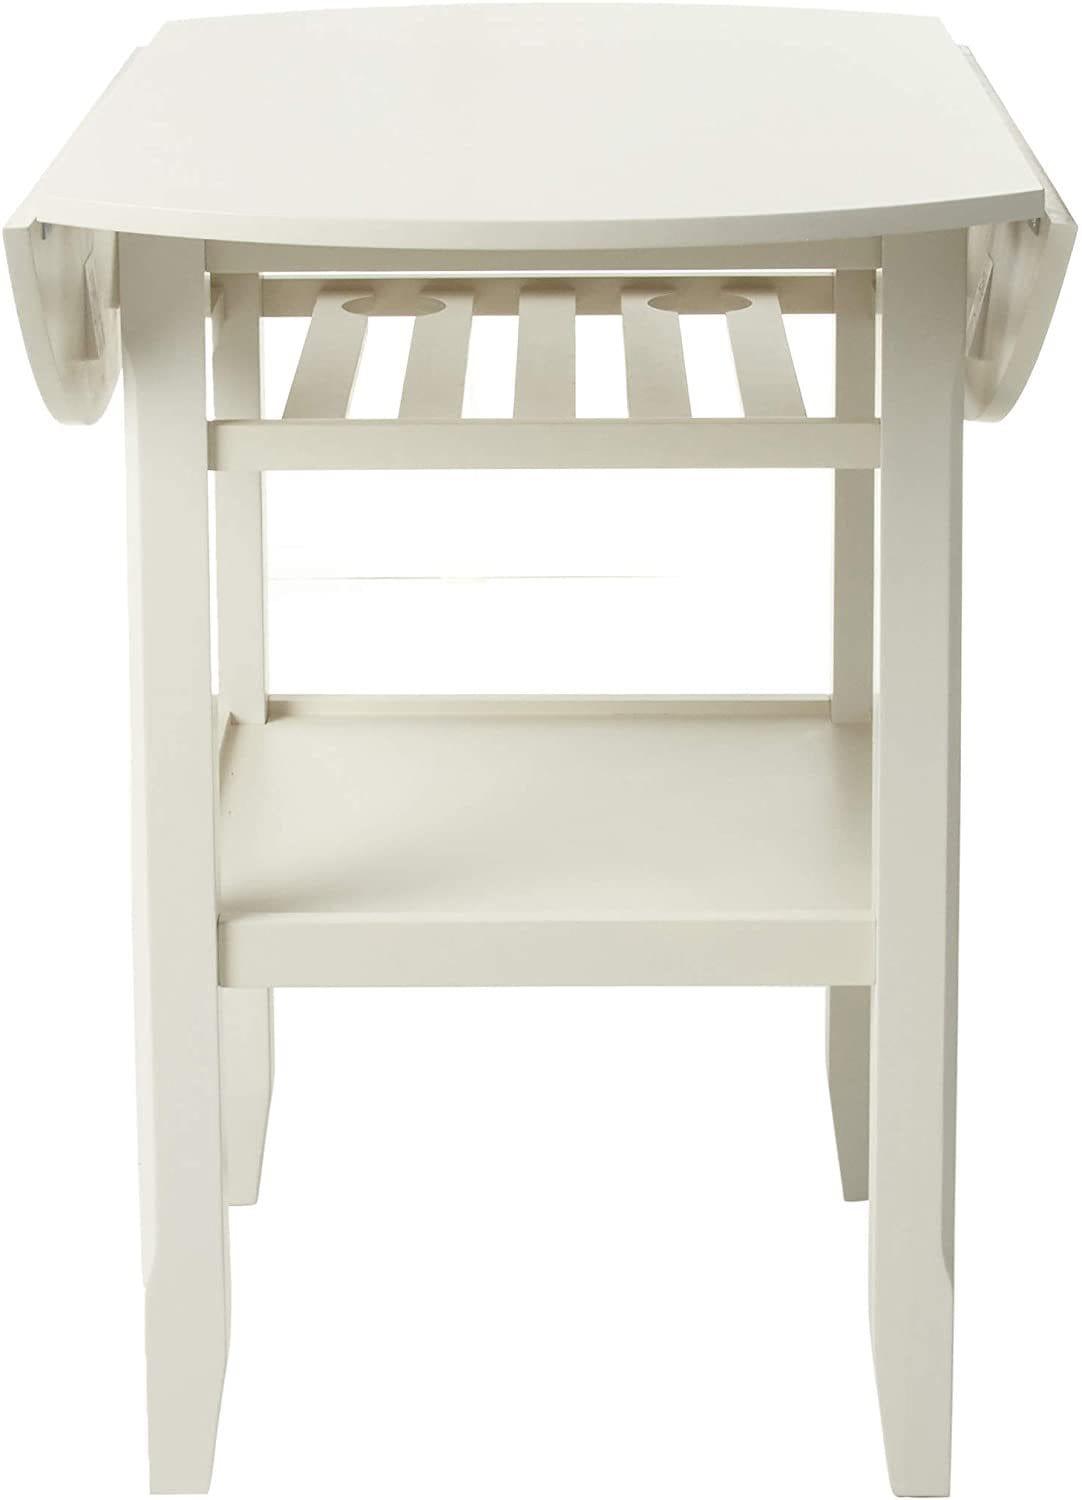 Shop ACME Tartys Counter Height Table in Cream 72545 Mademoiselle Home Decor